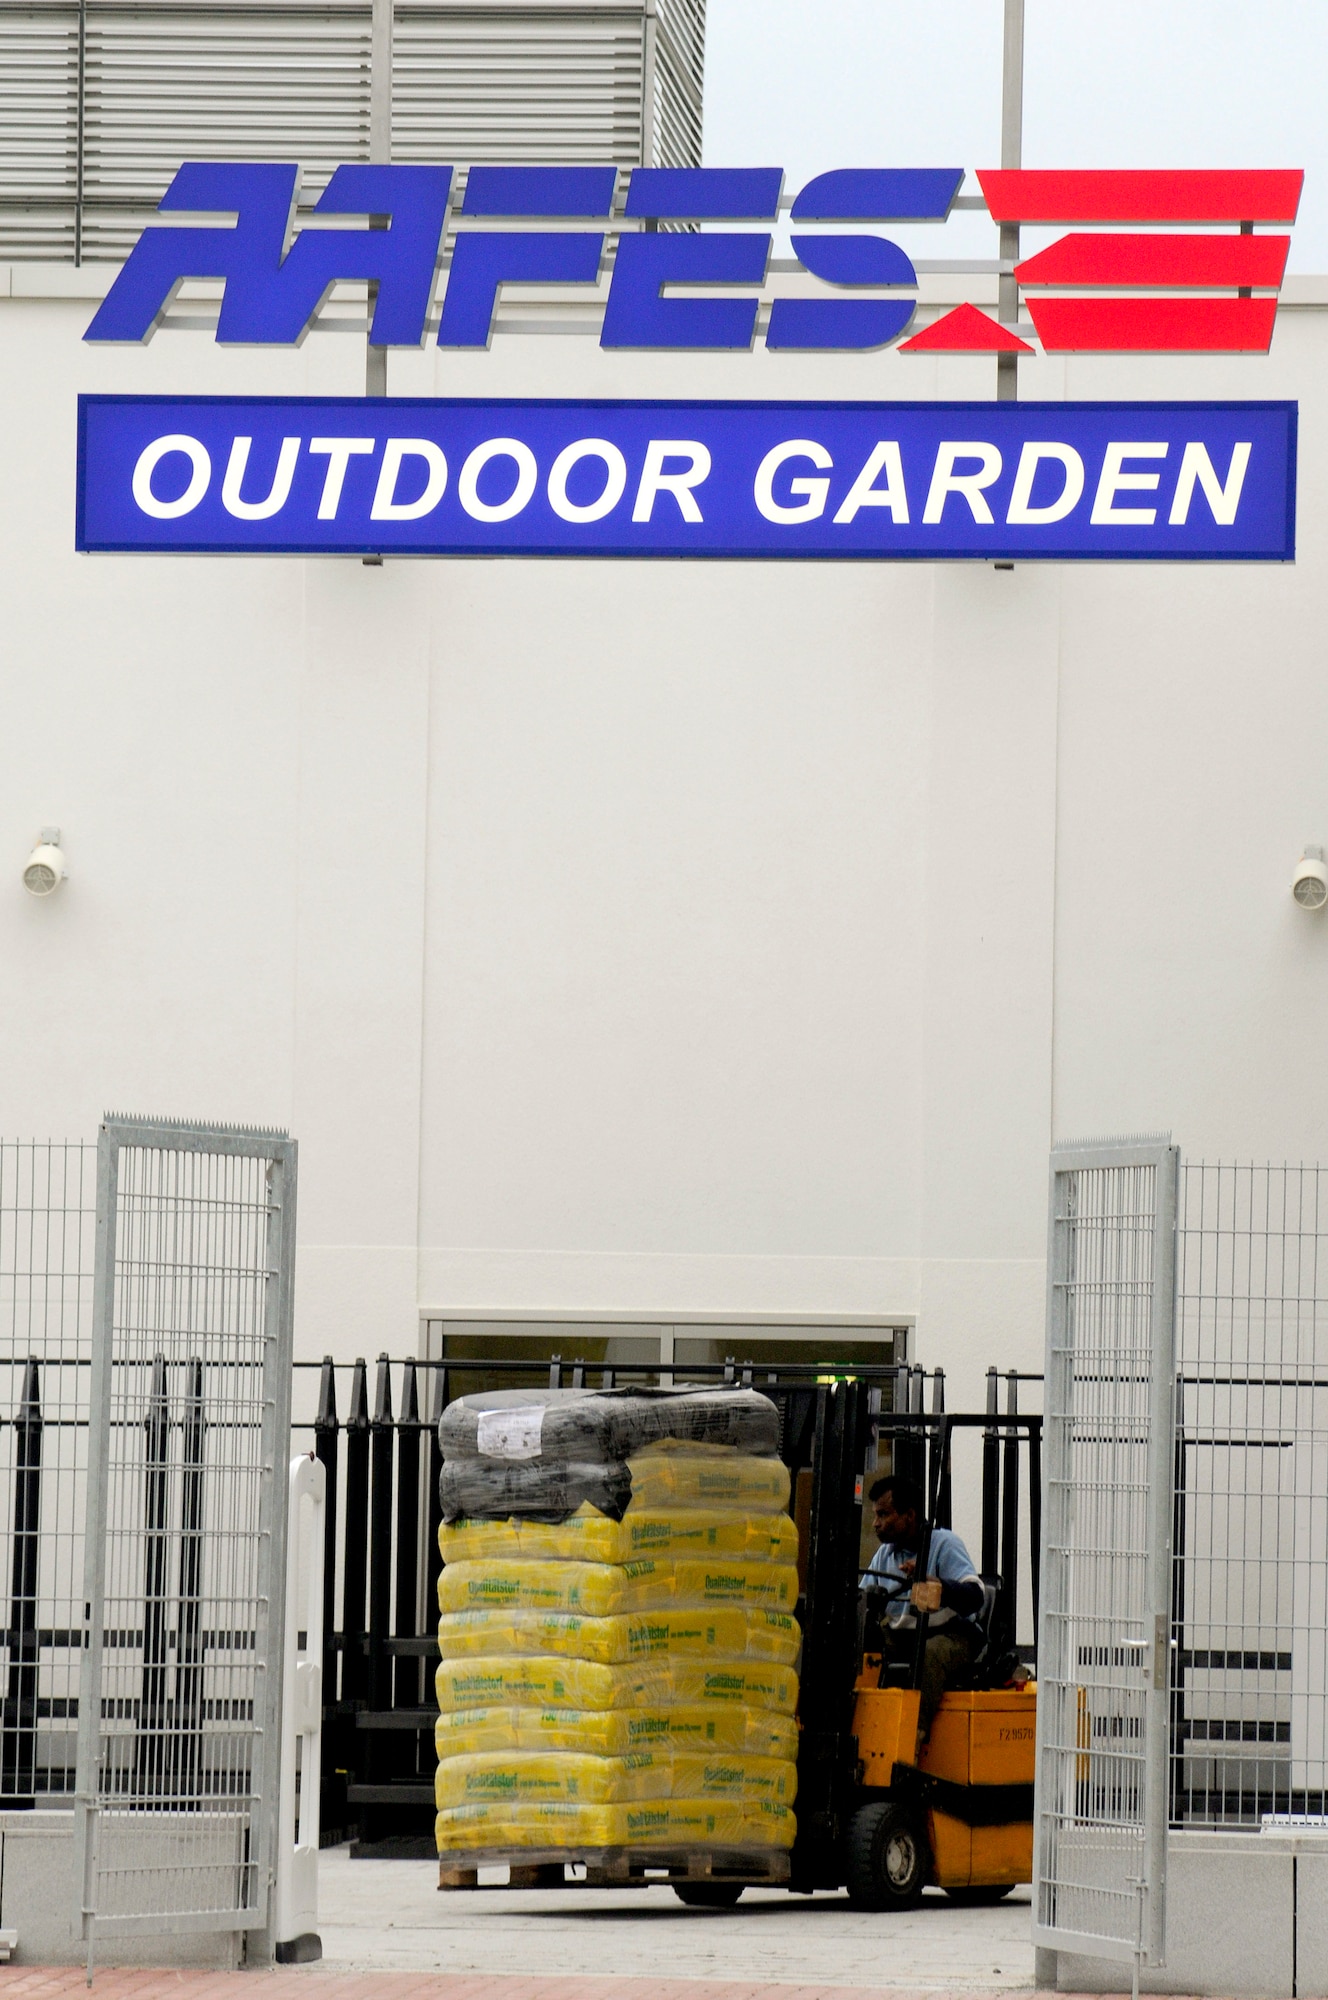 Edwin Varner, Army and Air Force Exchange Service engineering employee, stocks garden supplies in the Outdoor Garden area in preparation for the grand opening of the third and final phase, Ramstein Air Base, Germany, Sept. 17, 2009. The final phase of the KMCC is scheduled to open at 8:55 a.m. Sept. 25, 2009, with a ribbon cutting ceremony.  (U.S. Air Force photo by Tech. Sgt. Kenneth Bellard)